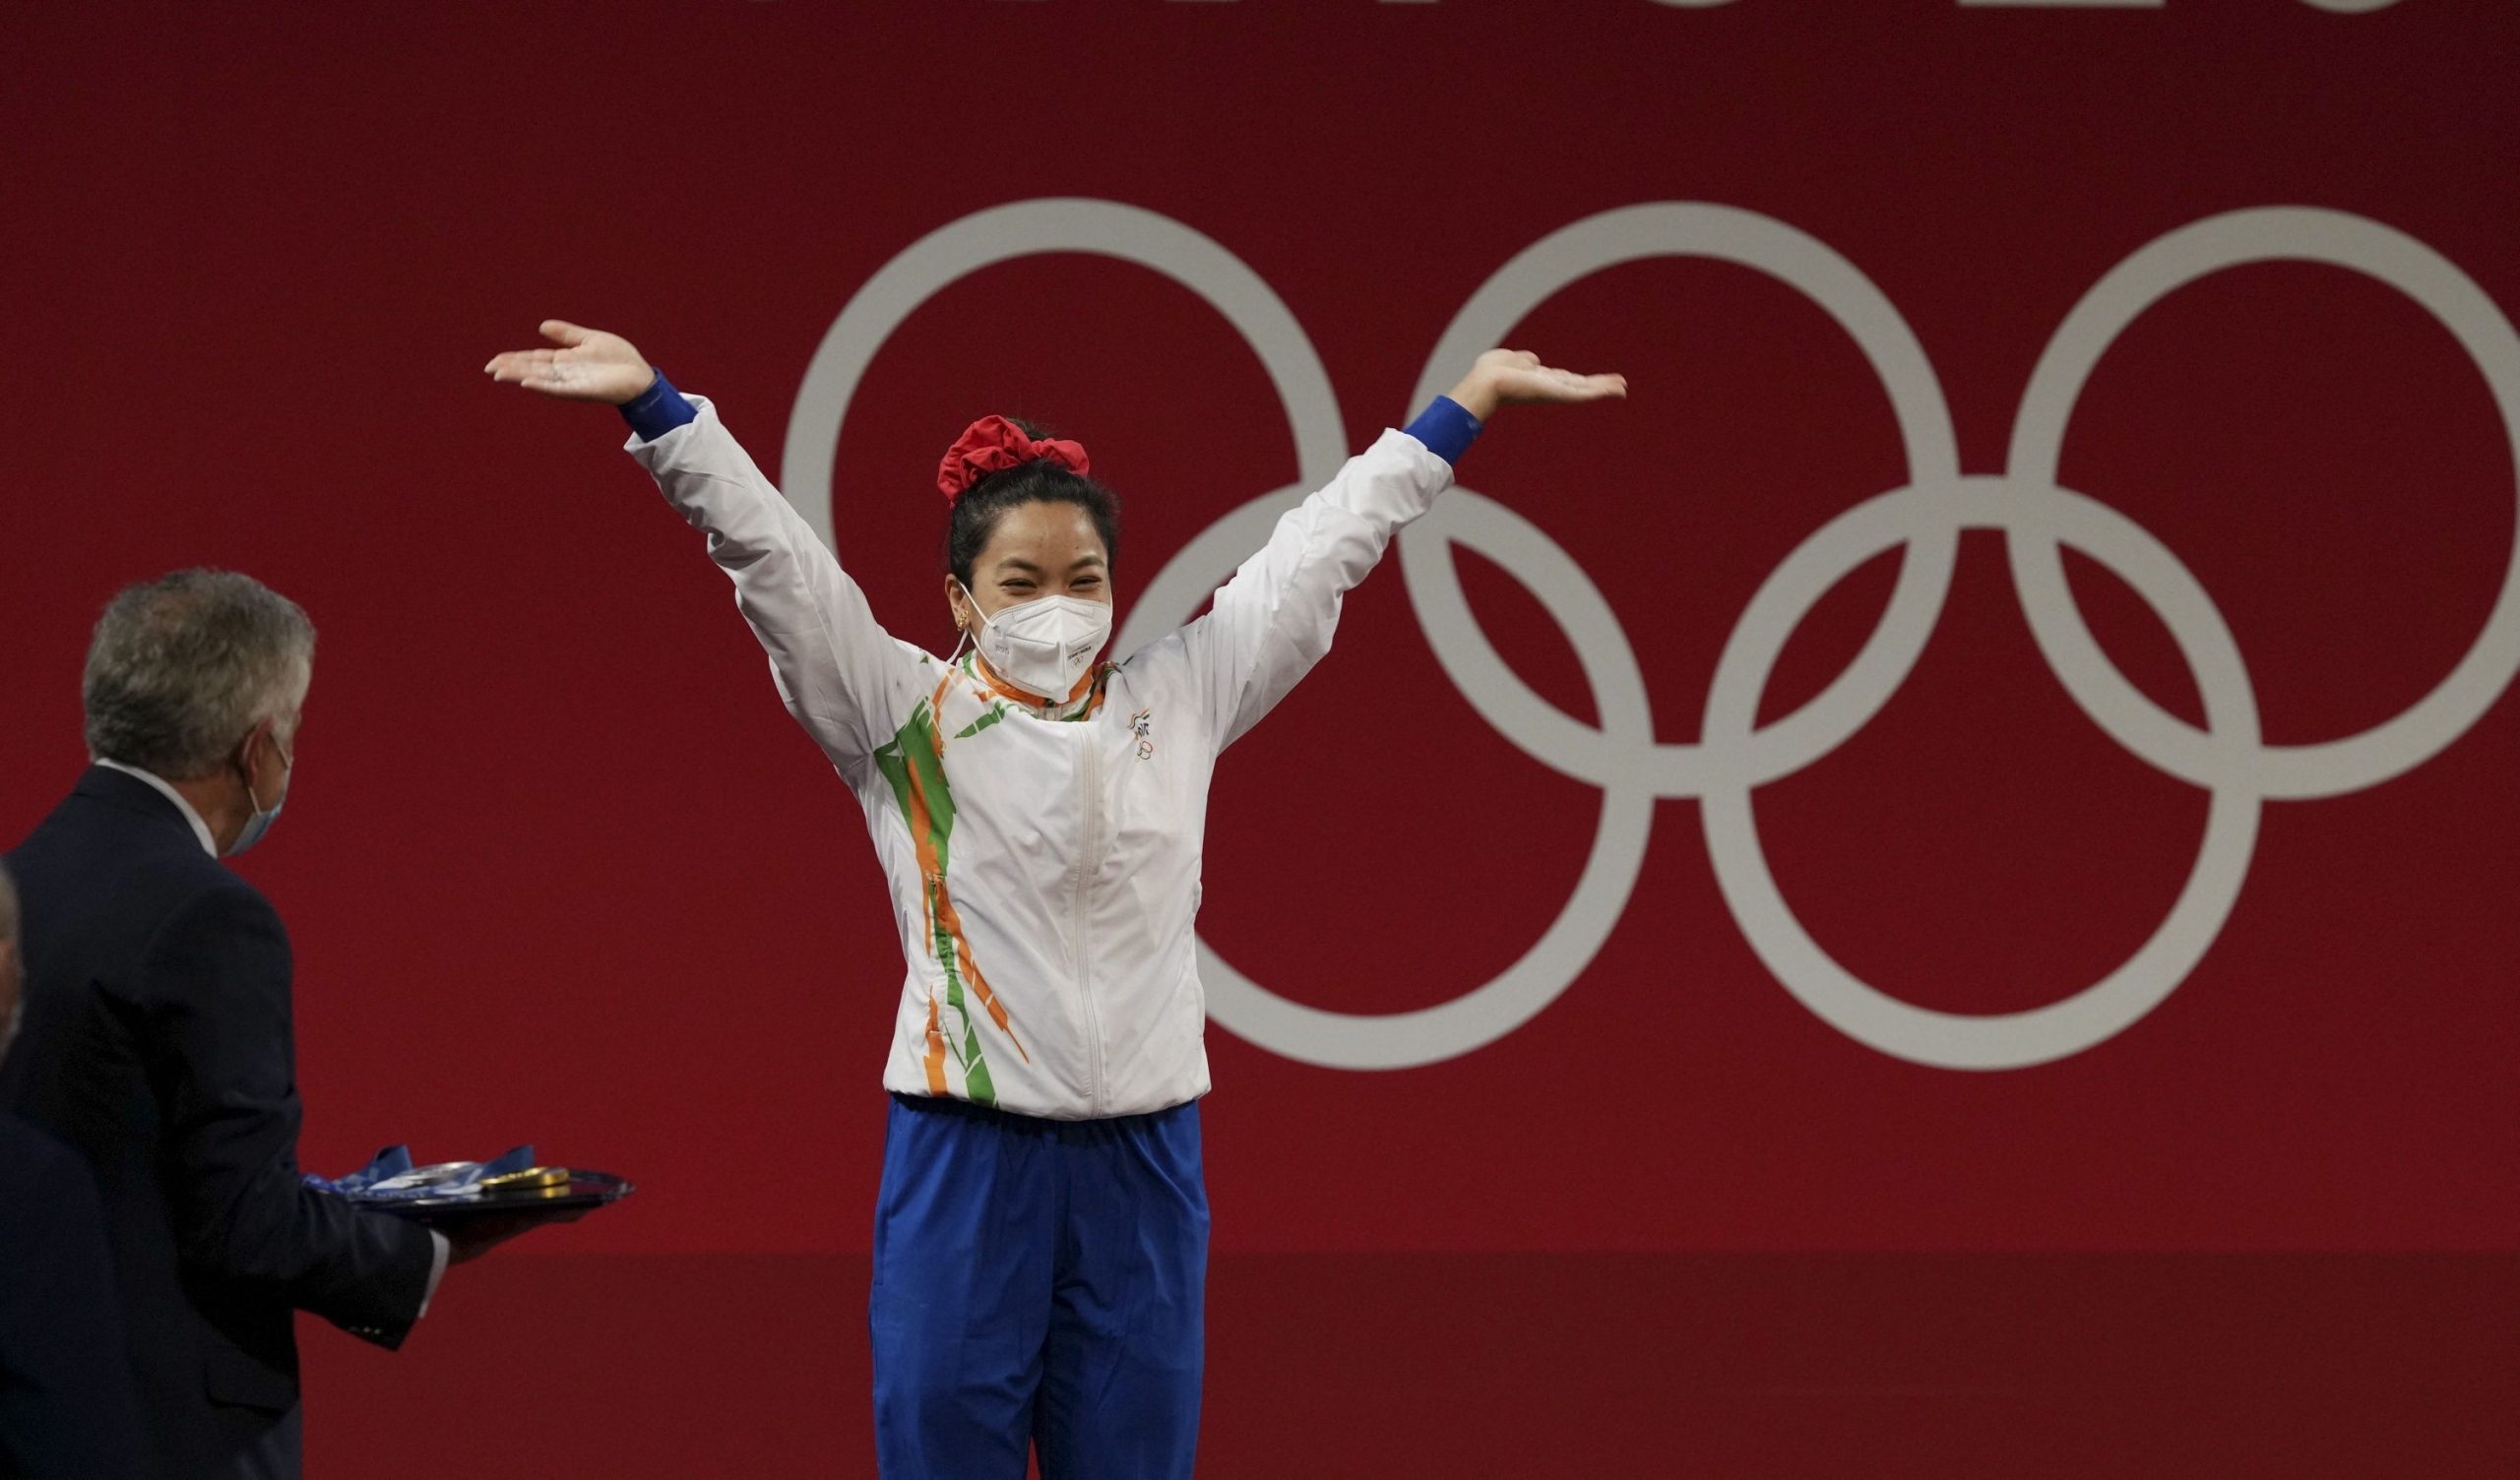 Mirabai Chanu wins Olympic medal, says dreaming of this for 5 years